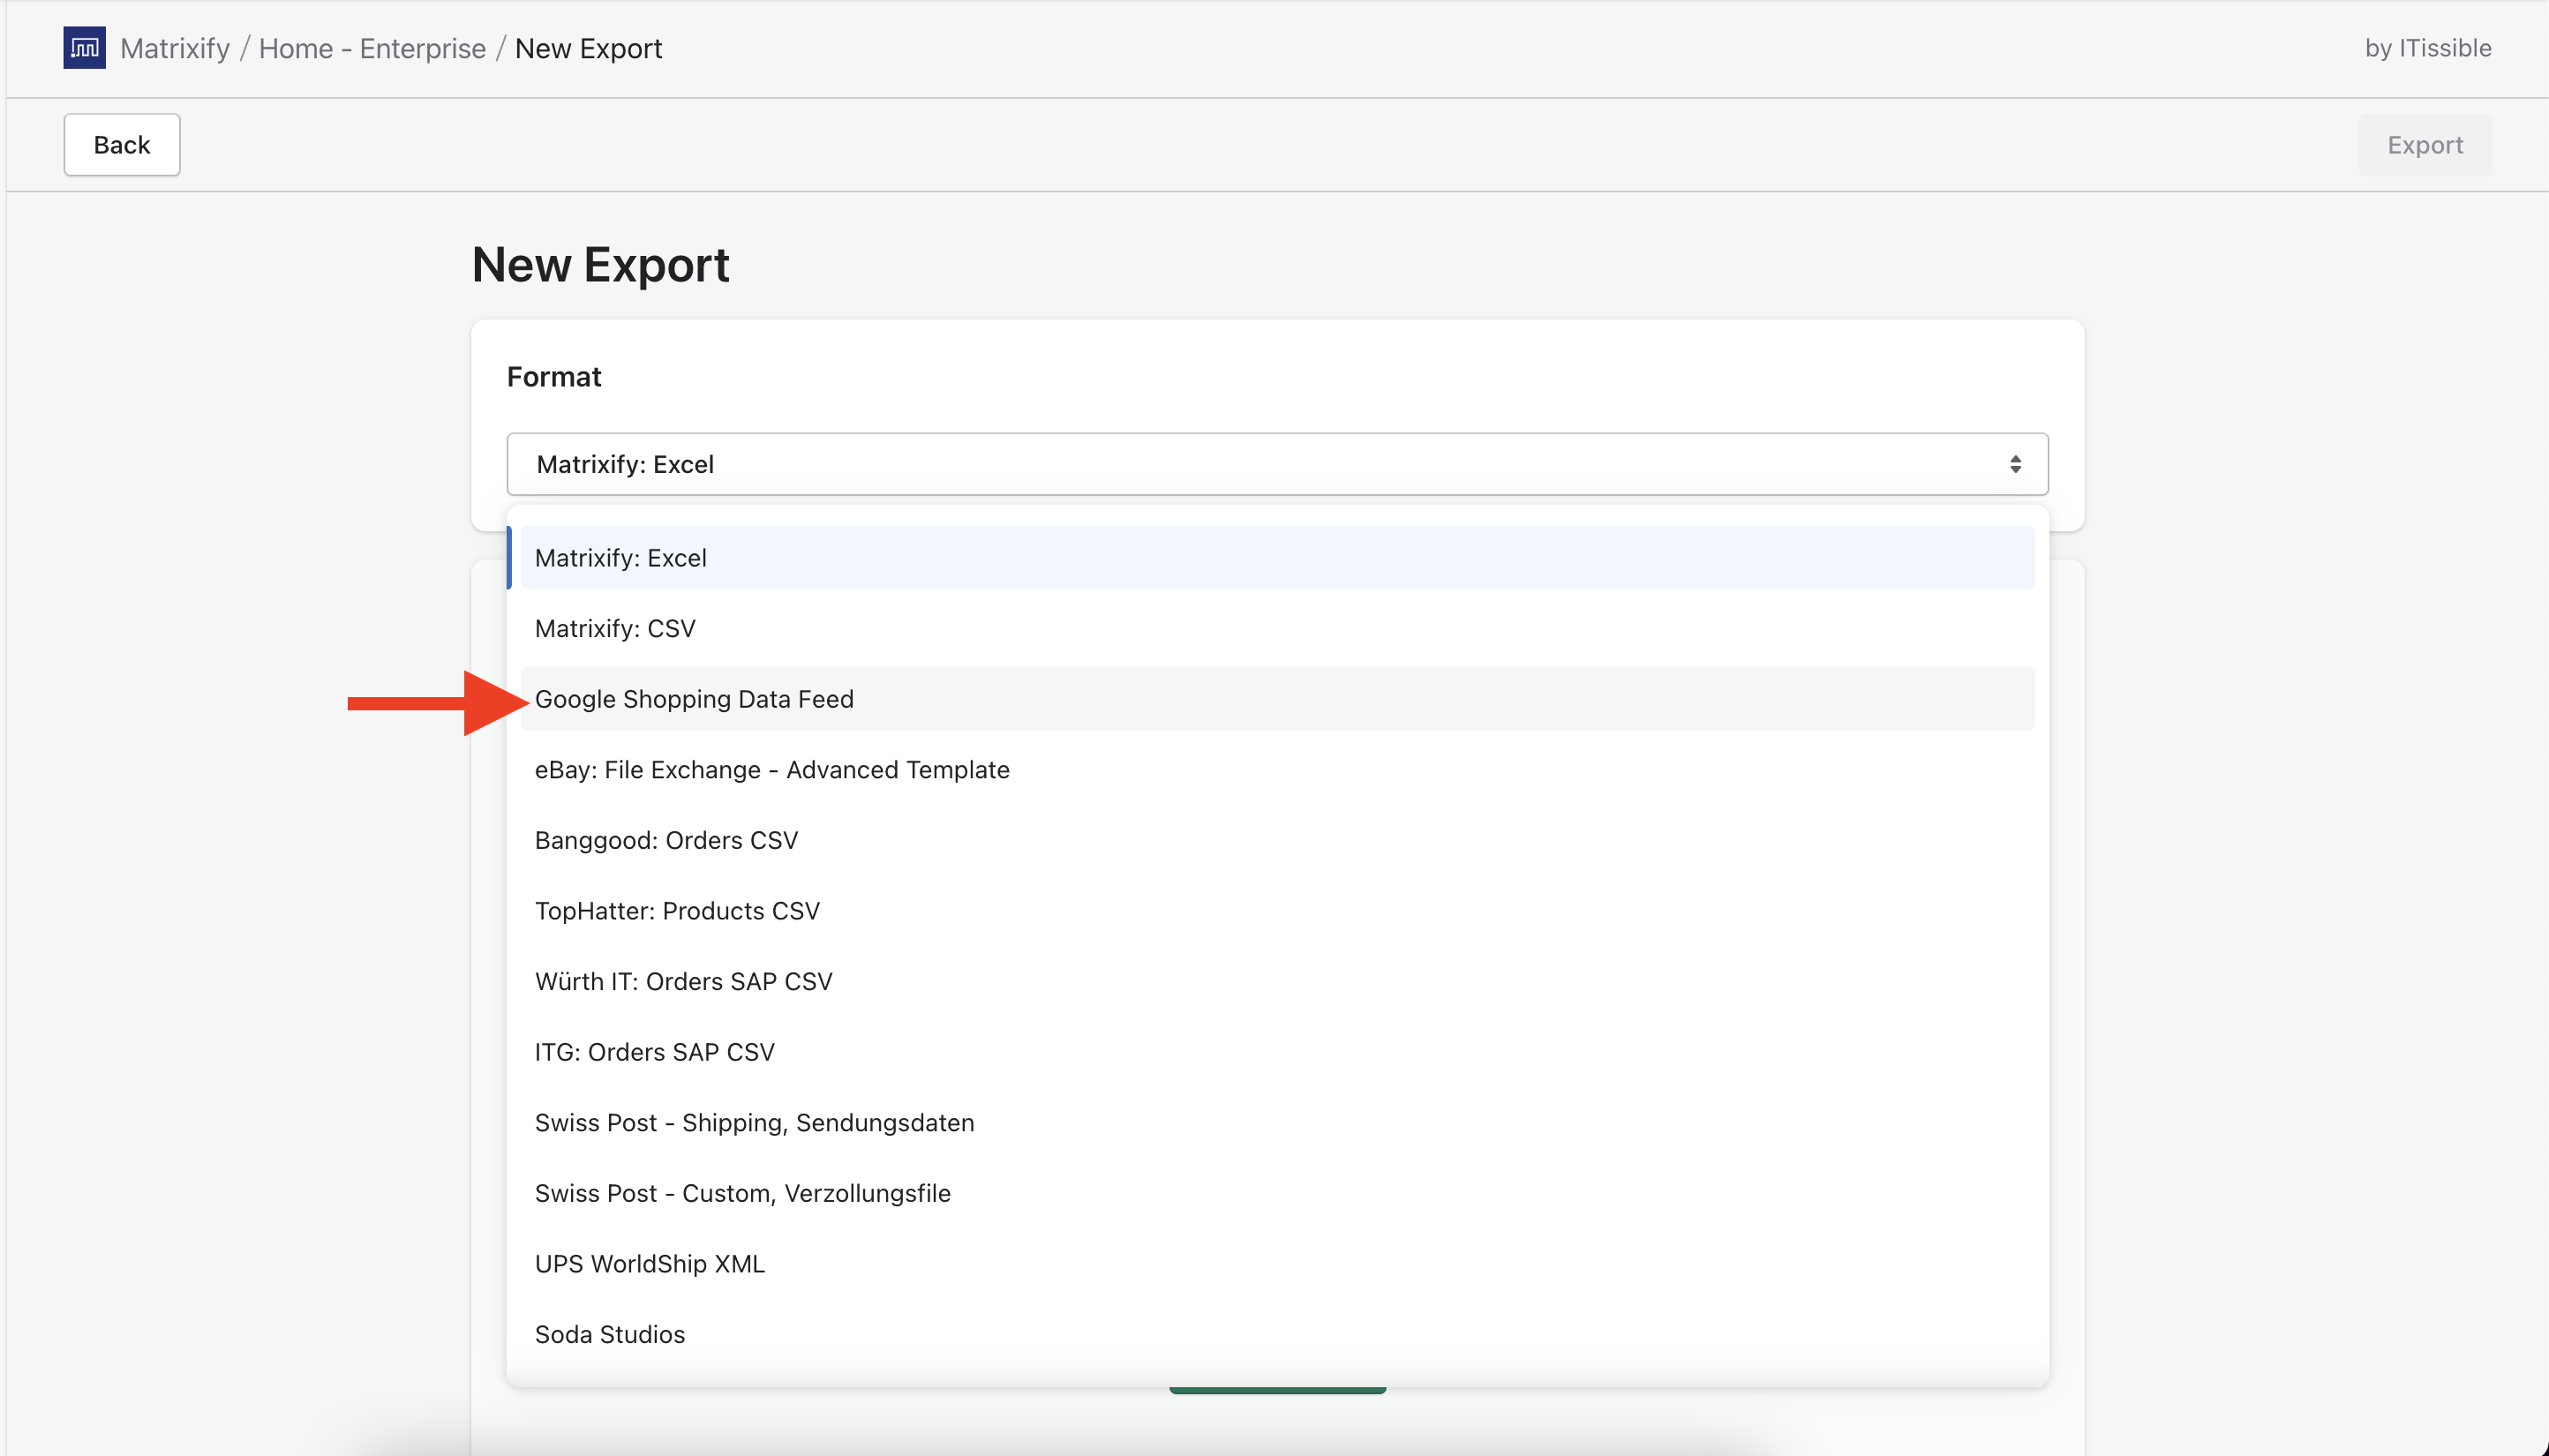 Select "Google Shopping Data Feed" for Export